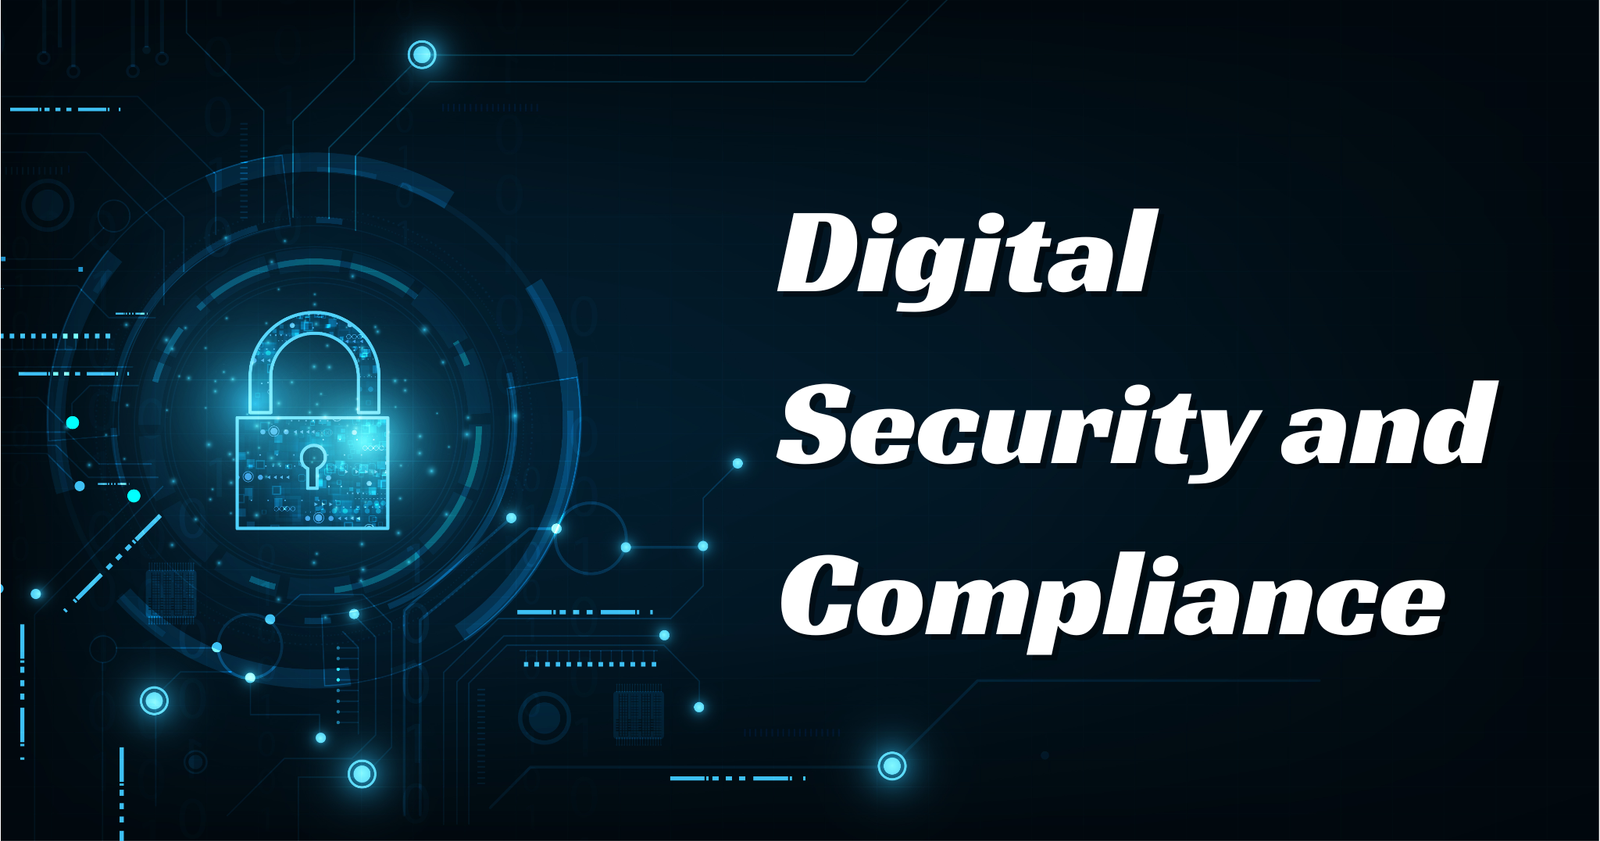 Digital Security and Compliance